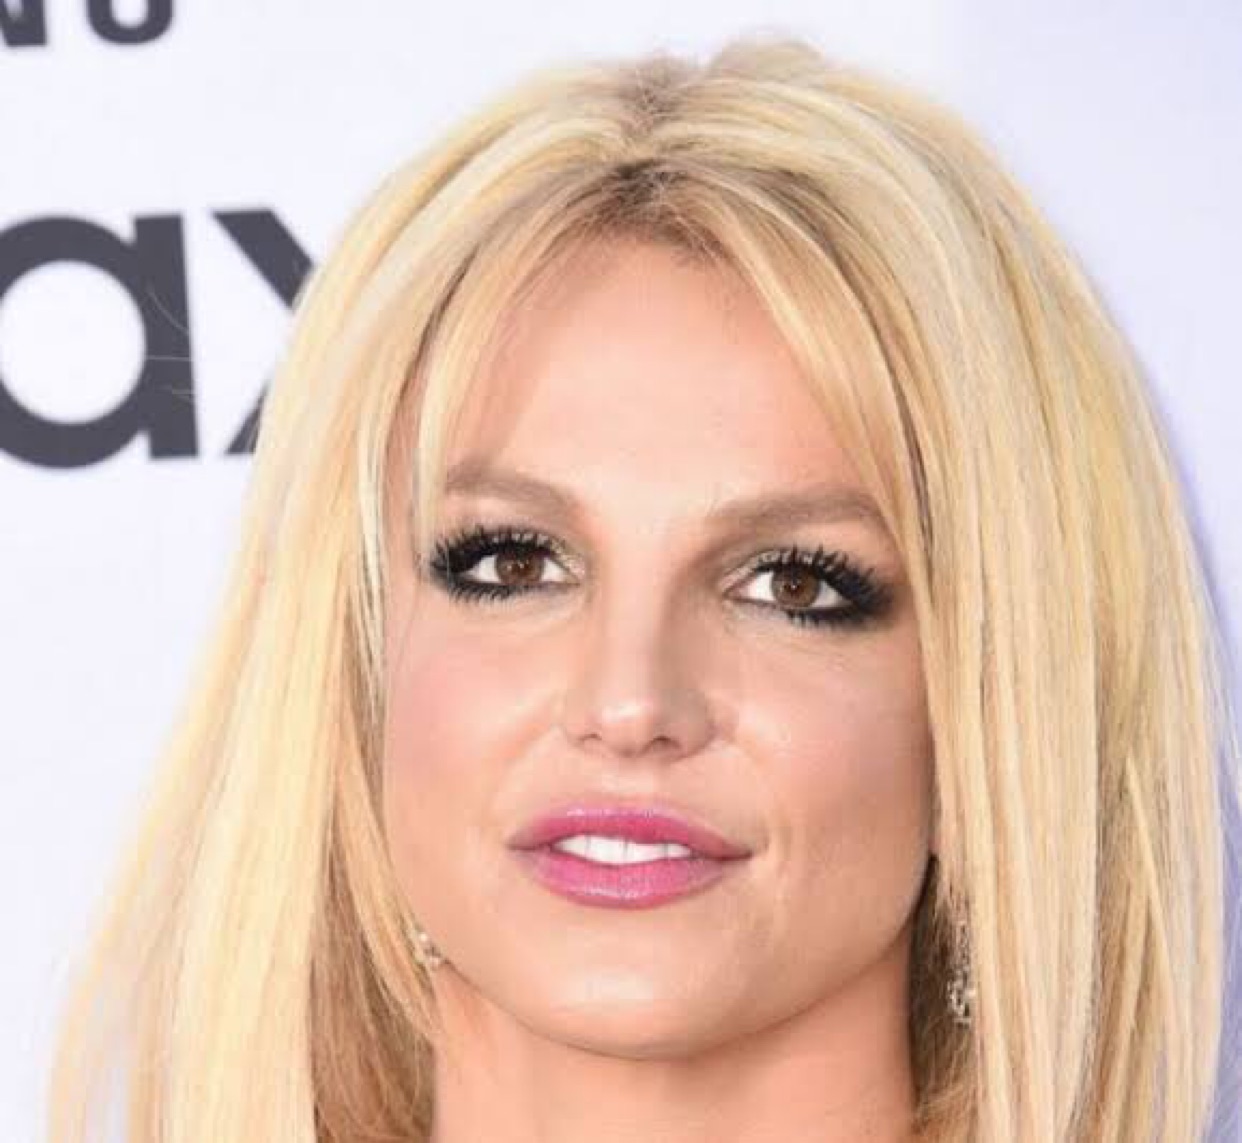 What’s New With The Britney Spears Saga? - She Was Constantly Given Anti-Psychotic Medication